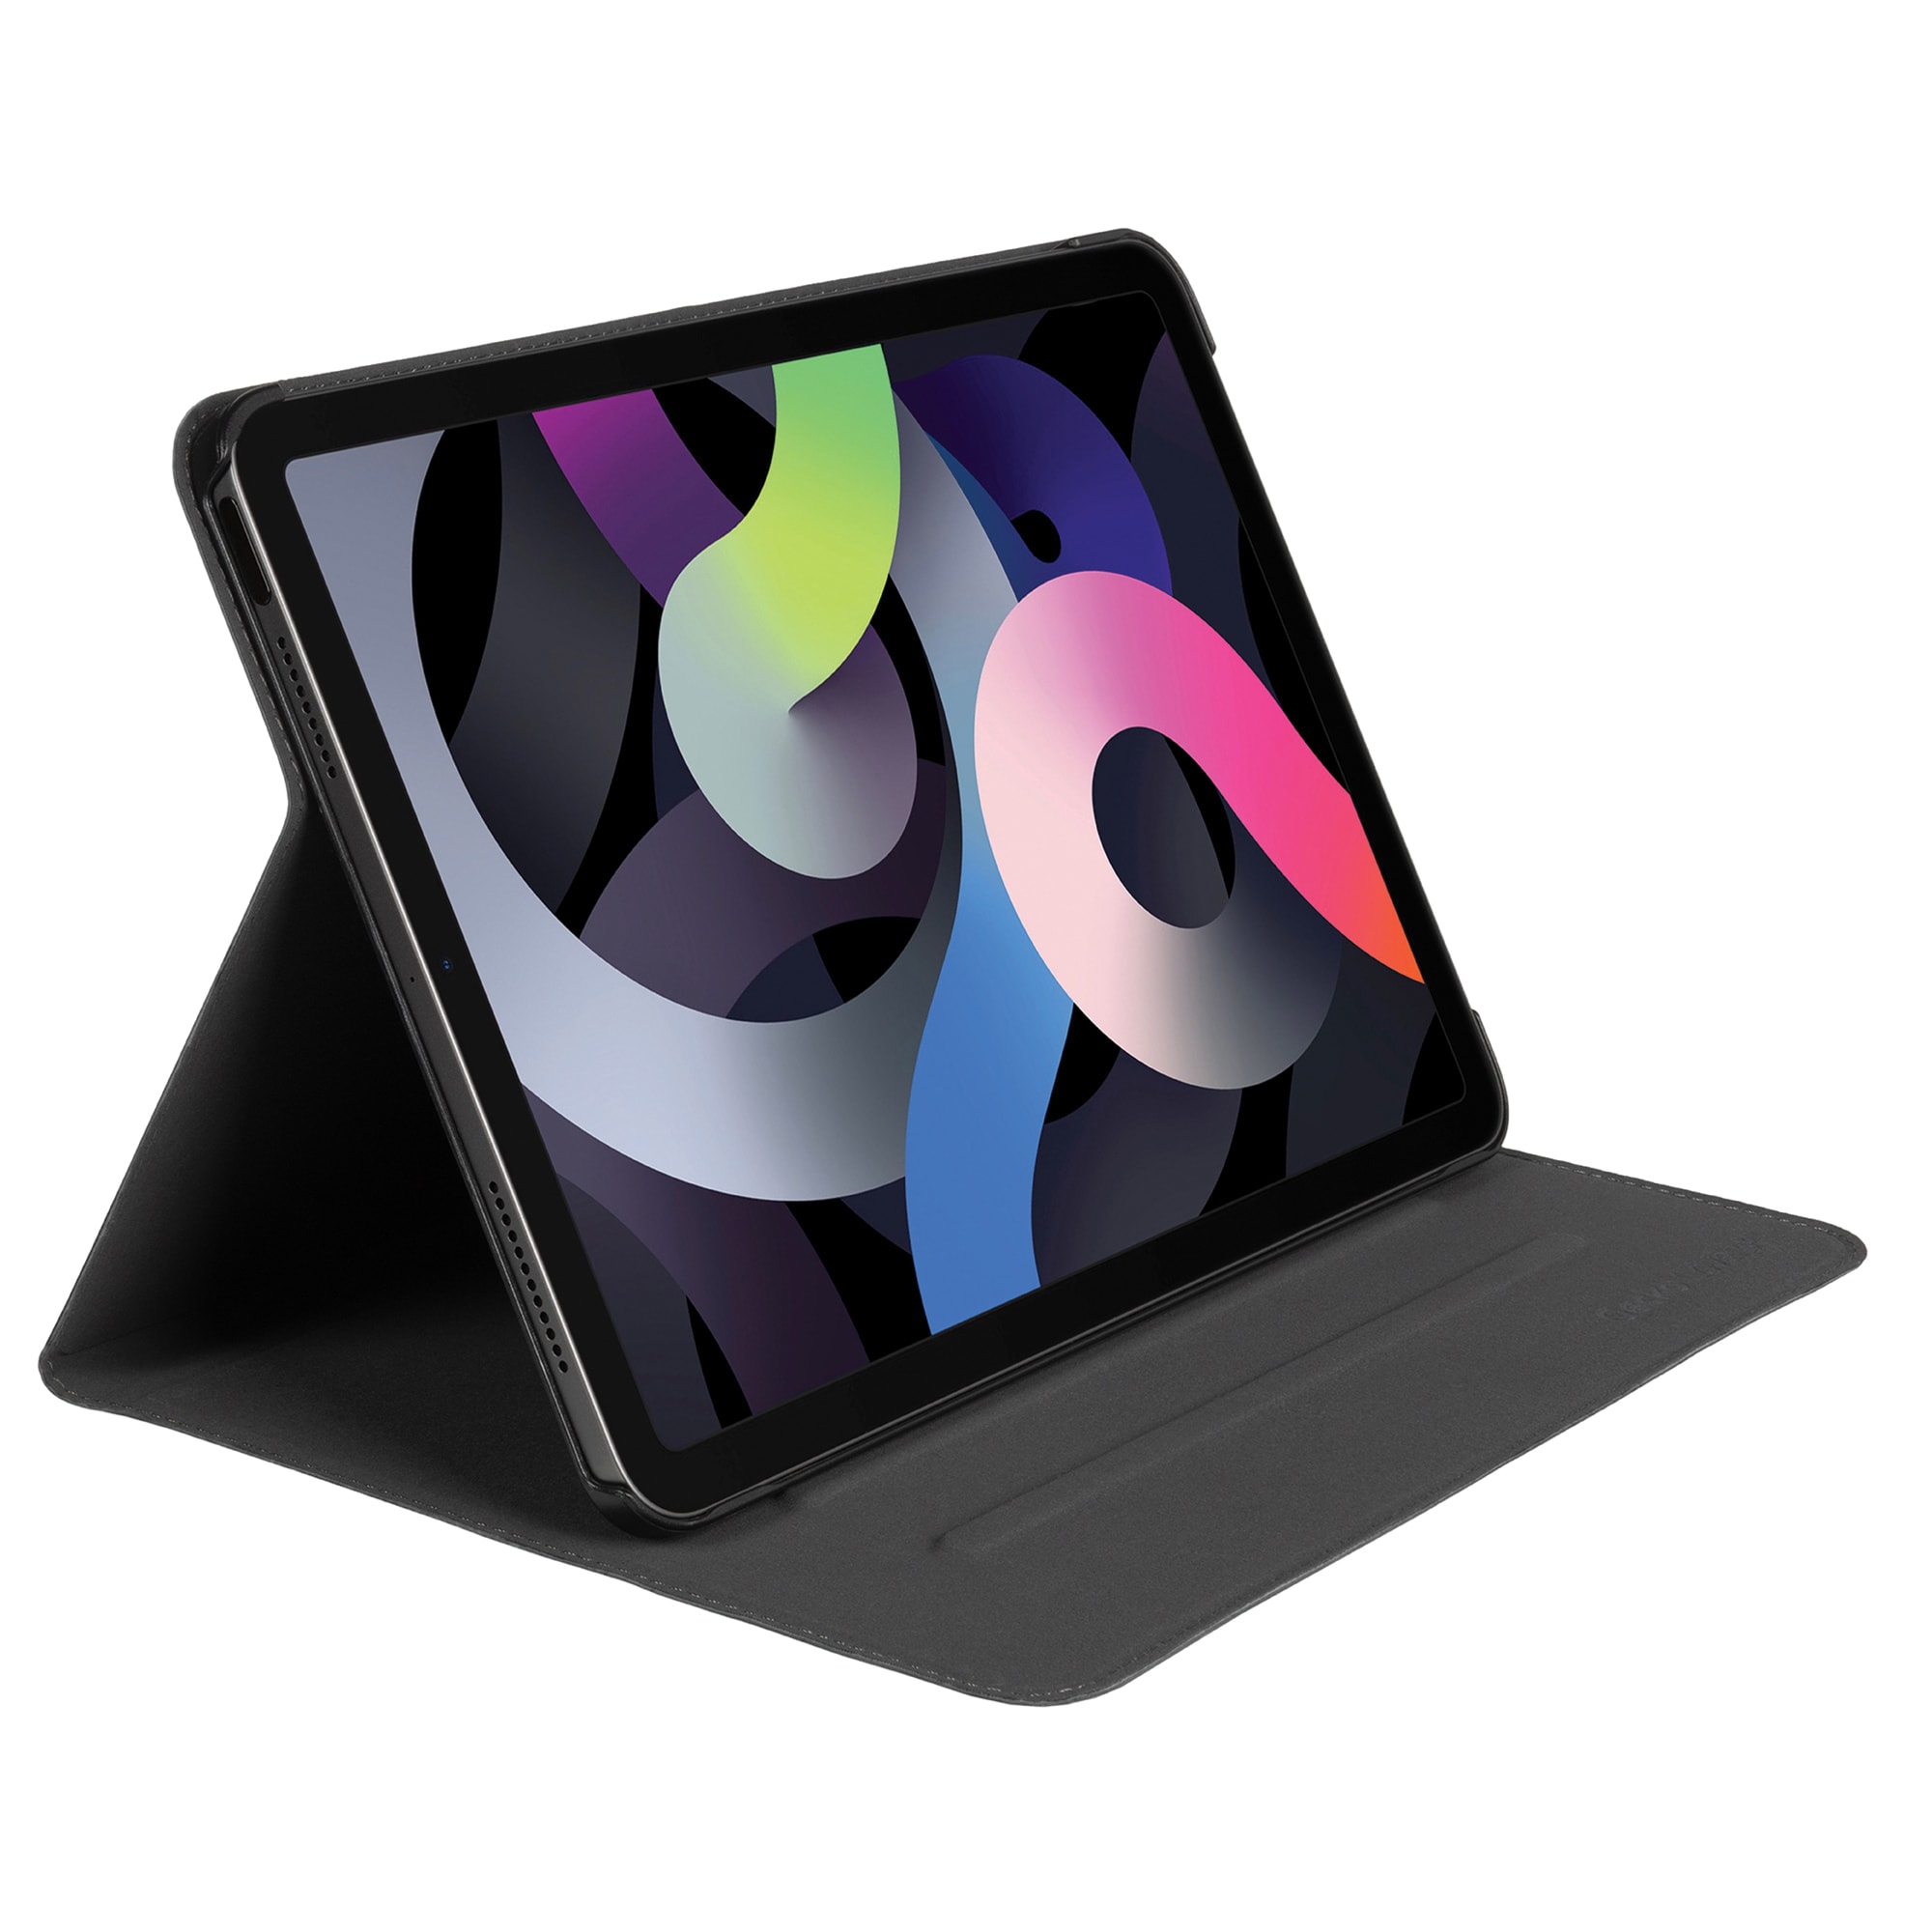 forlade Tak for din hjælp udluftning Gecko Covers Gecko Covers Easyclick 2 Tablet Cover For 10.9-in Apple Ipad  Air 2020/2022 (black) in the Tablet Accessories department at Lowes.com